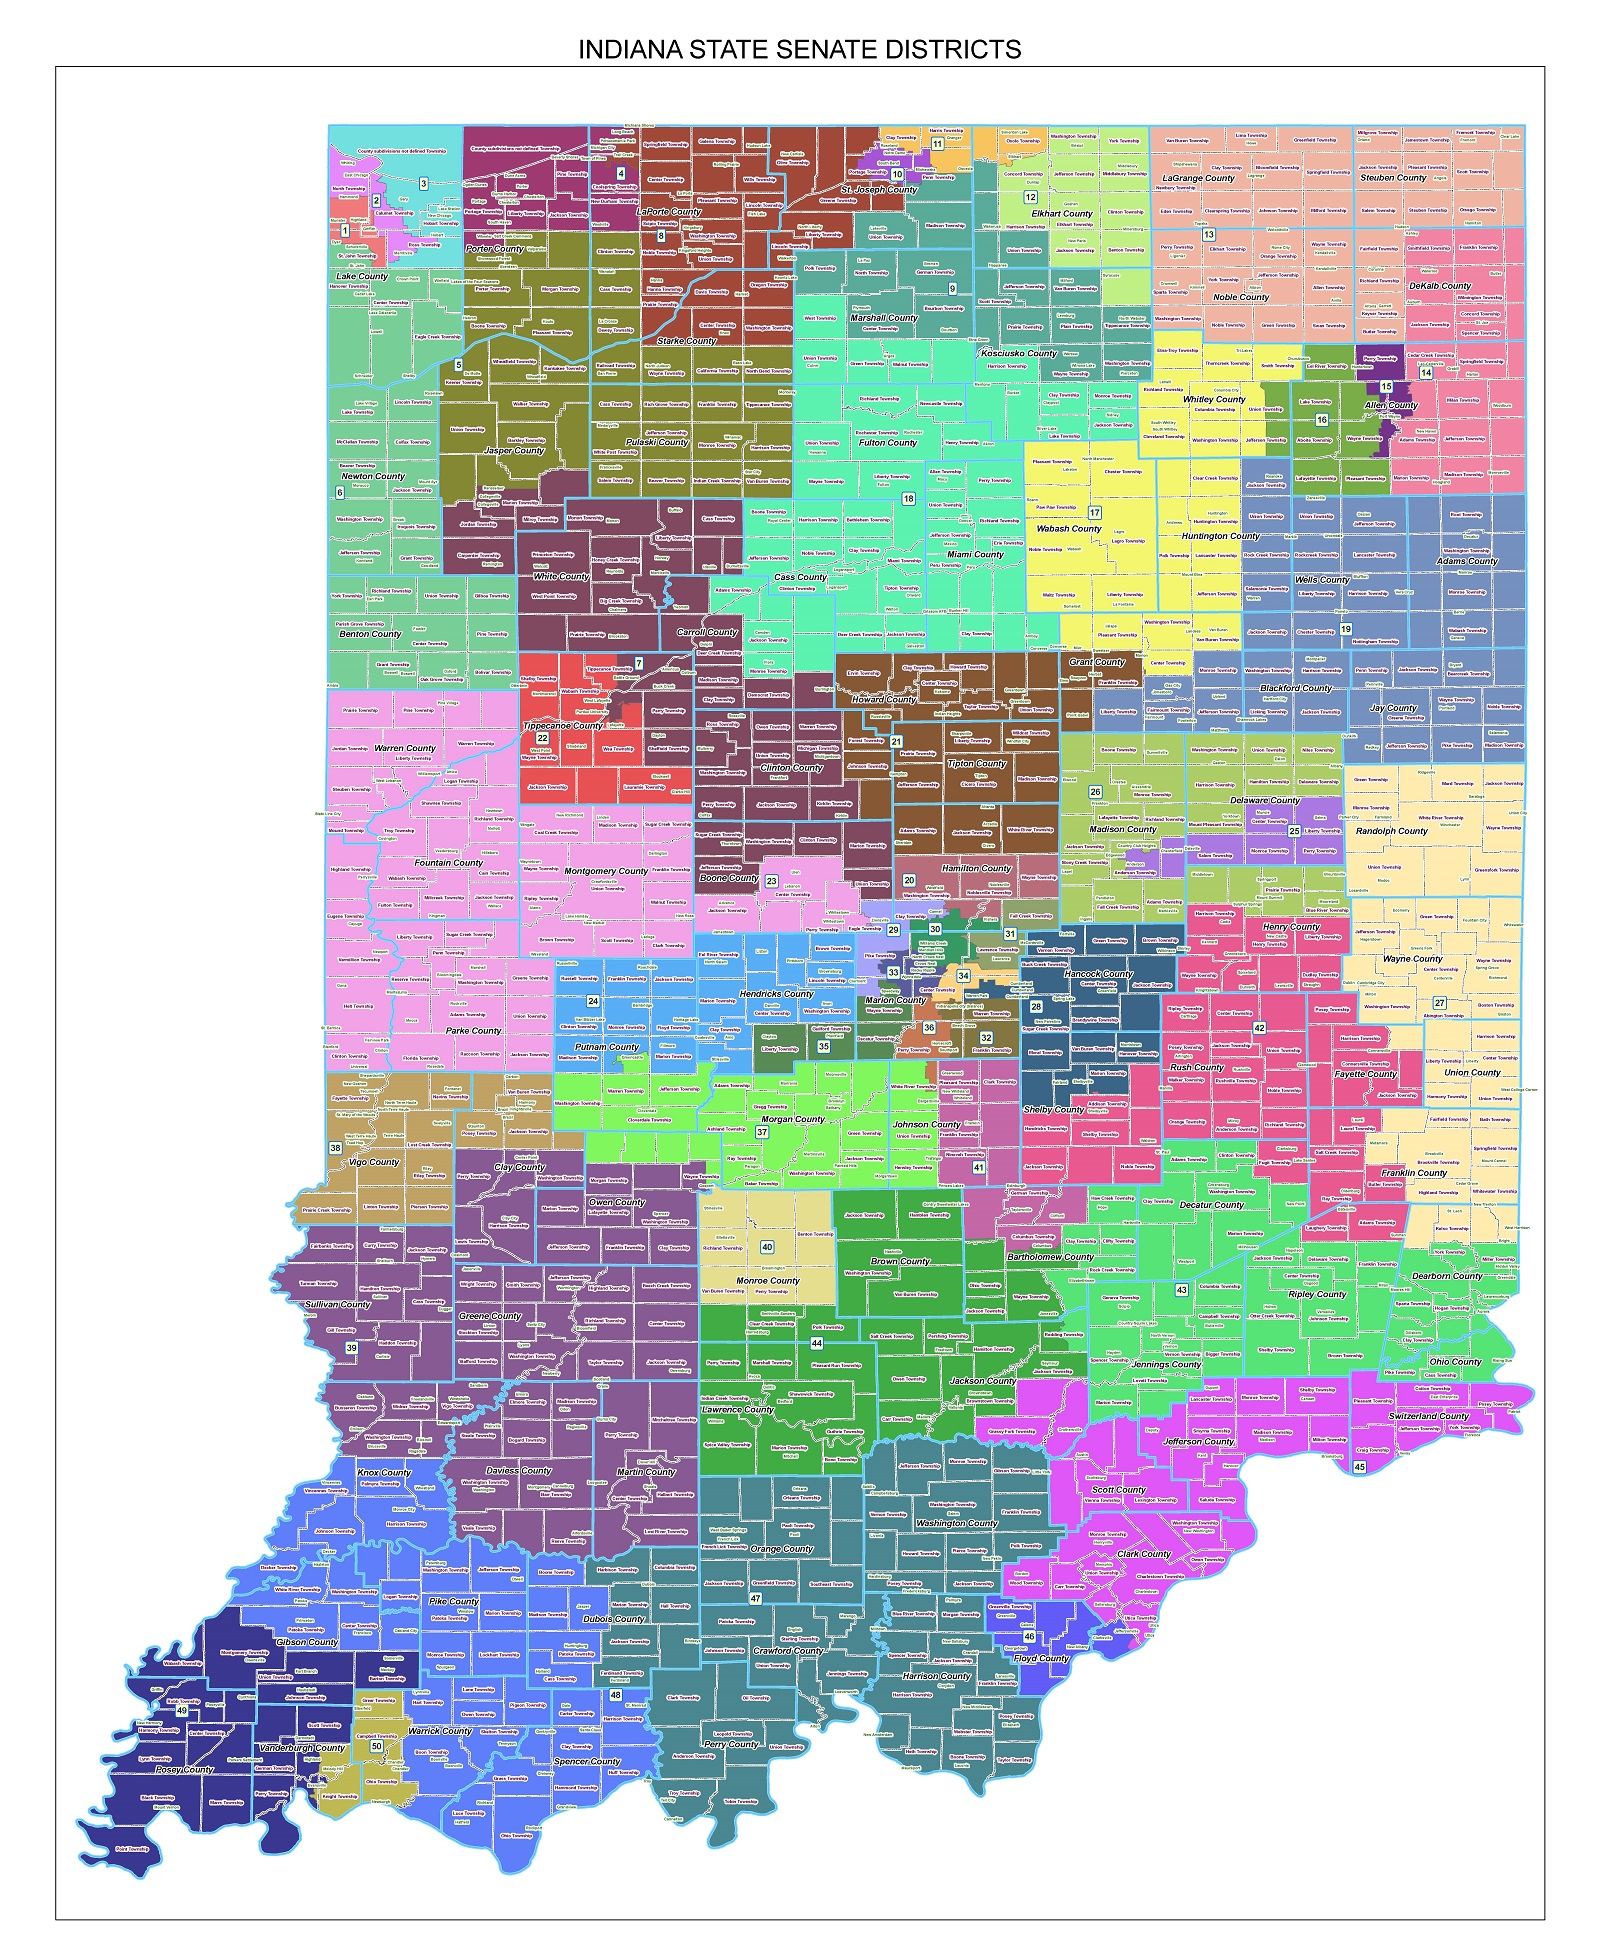 State redistricting information for Indiana